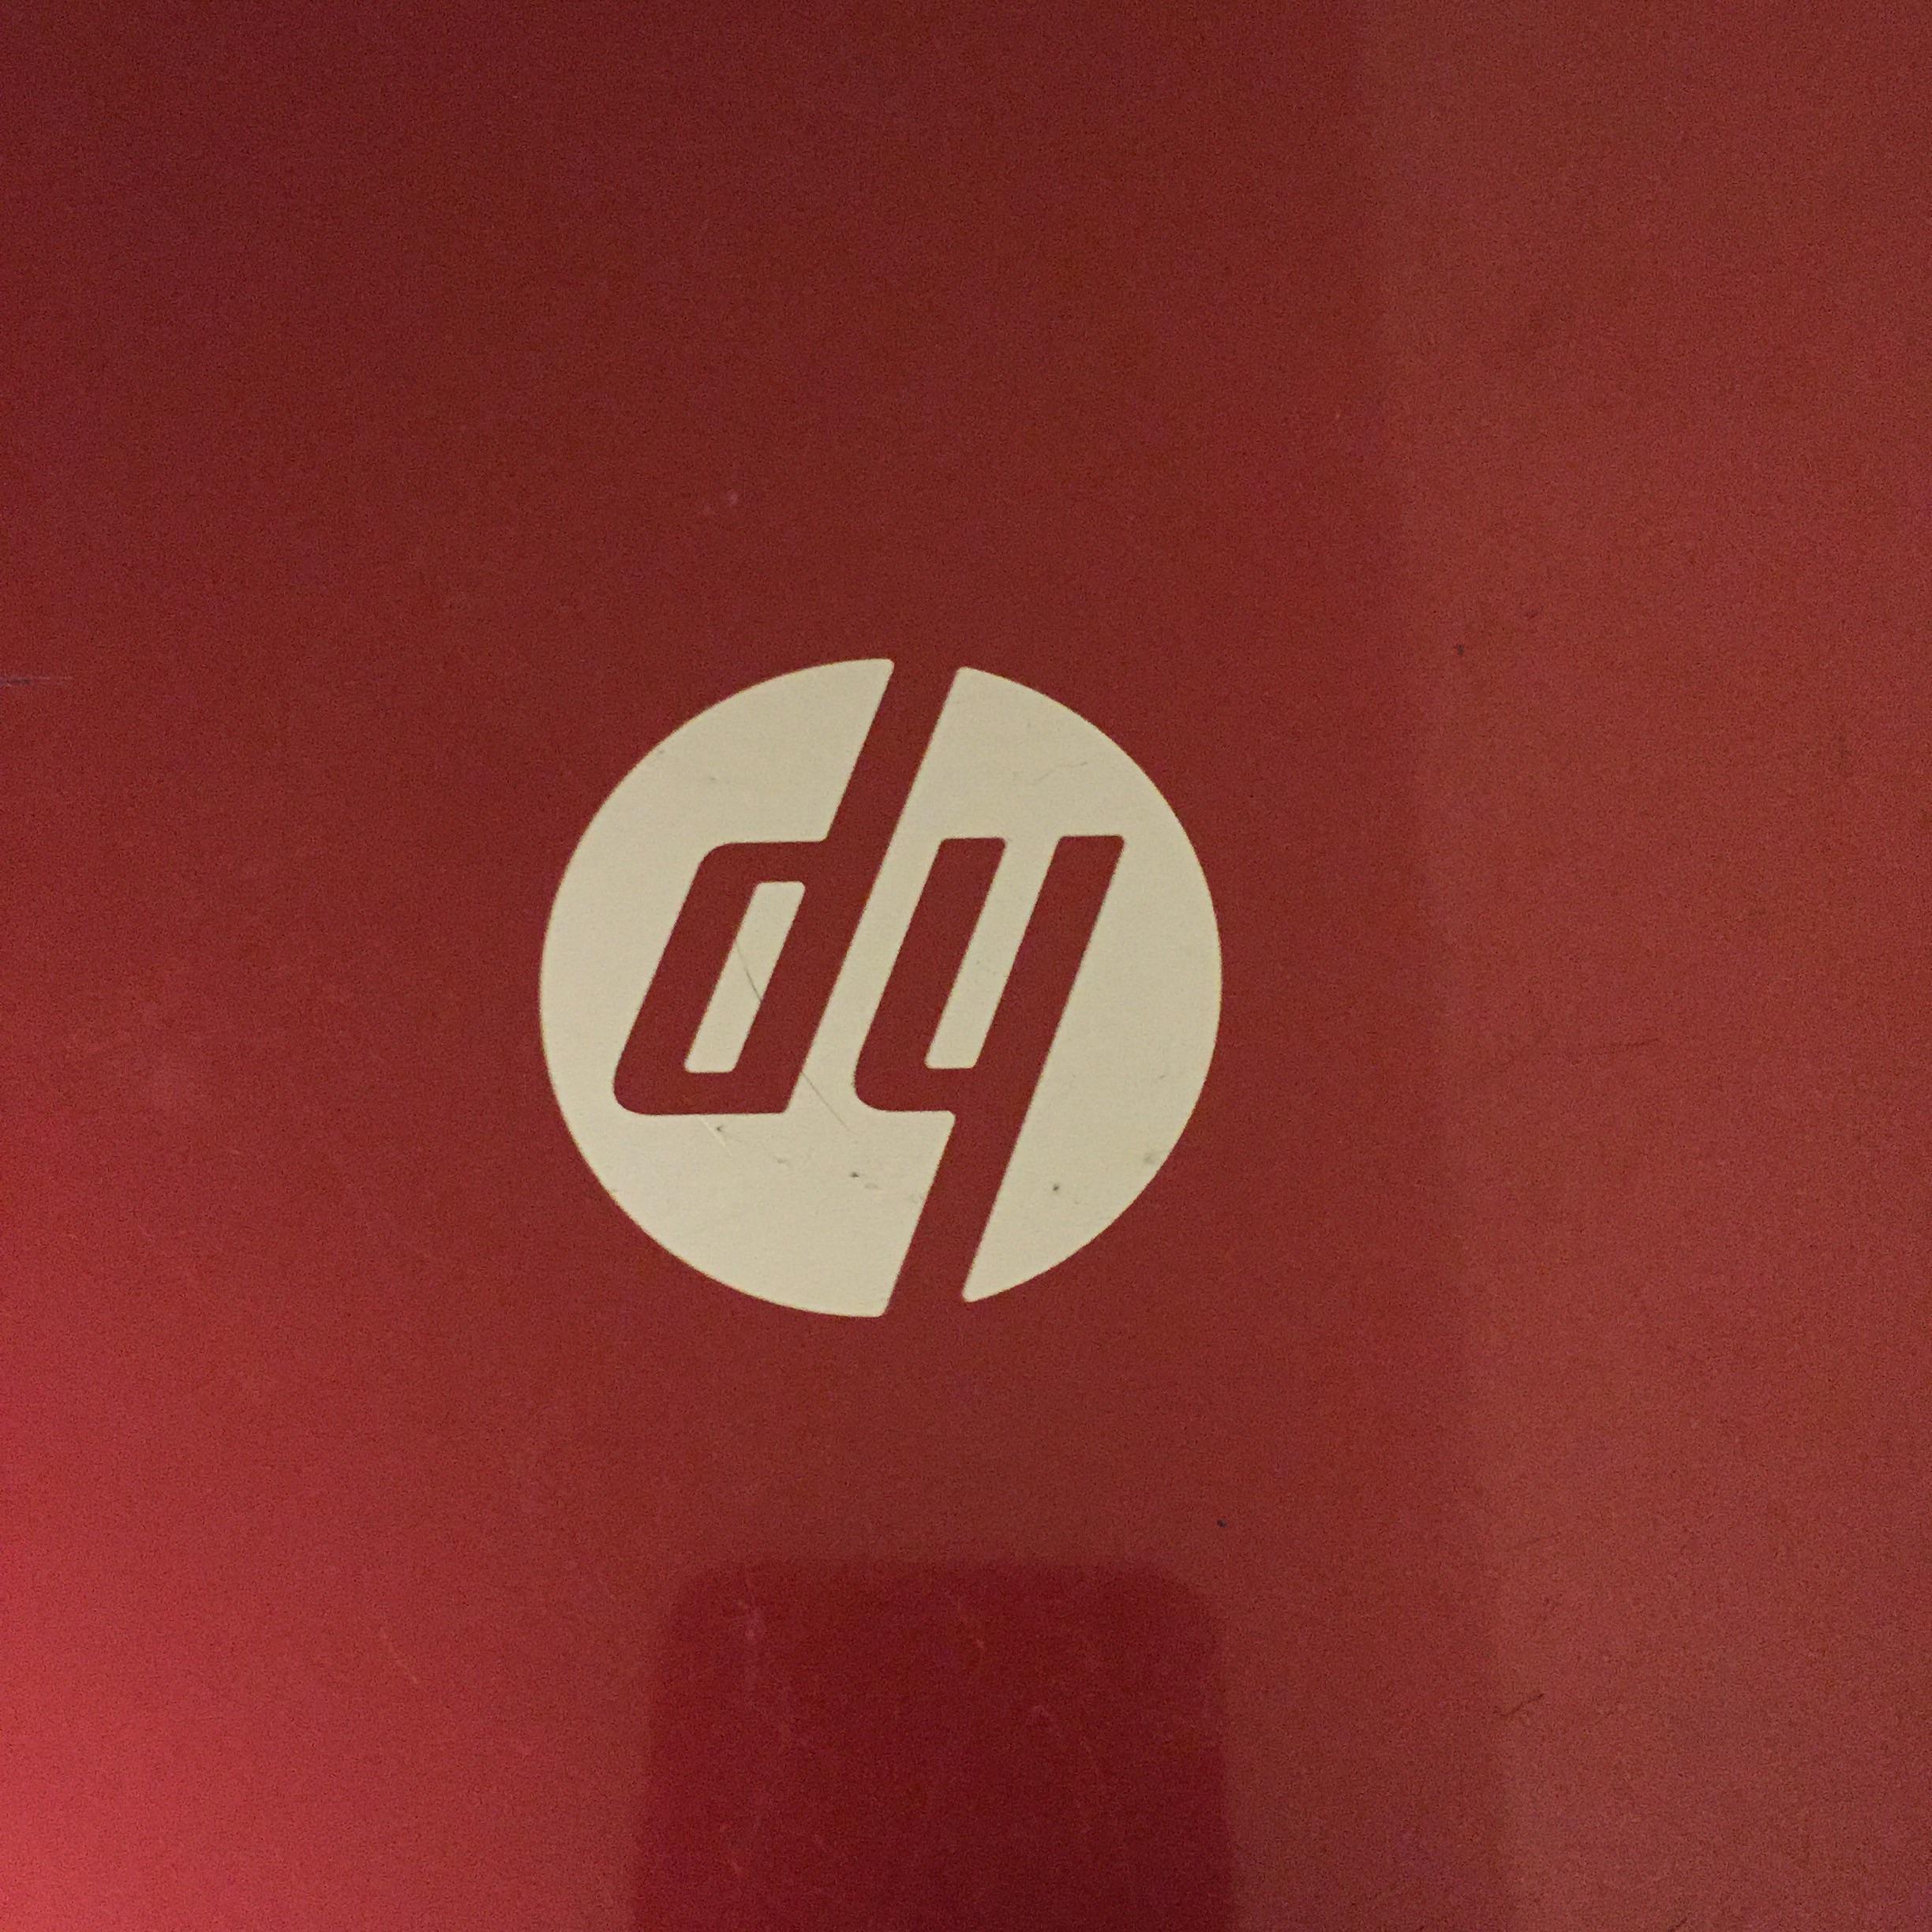 D4 Logo - Just noticed the HP logo upside down turns into D4 : Crewniverse